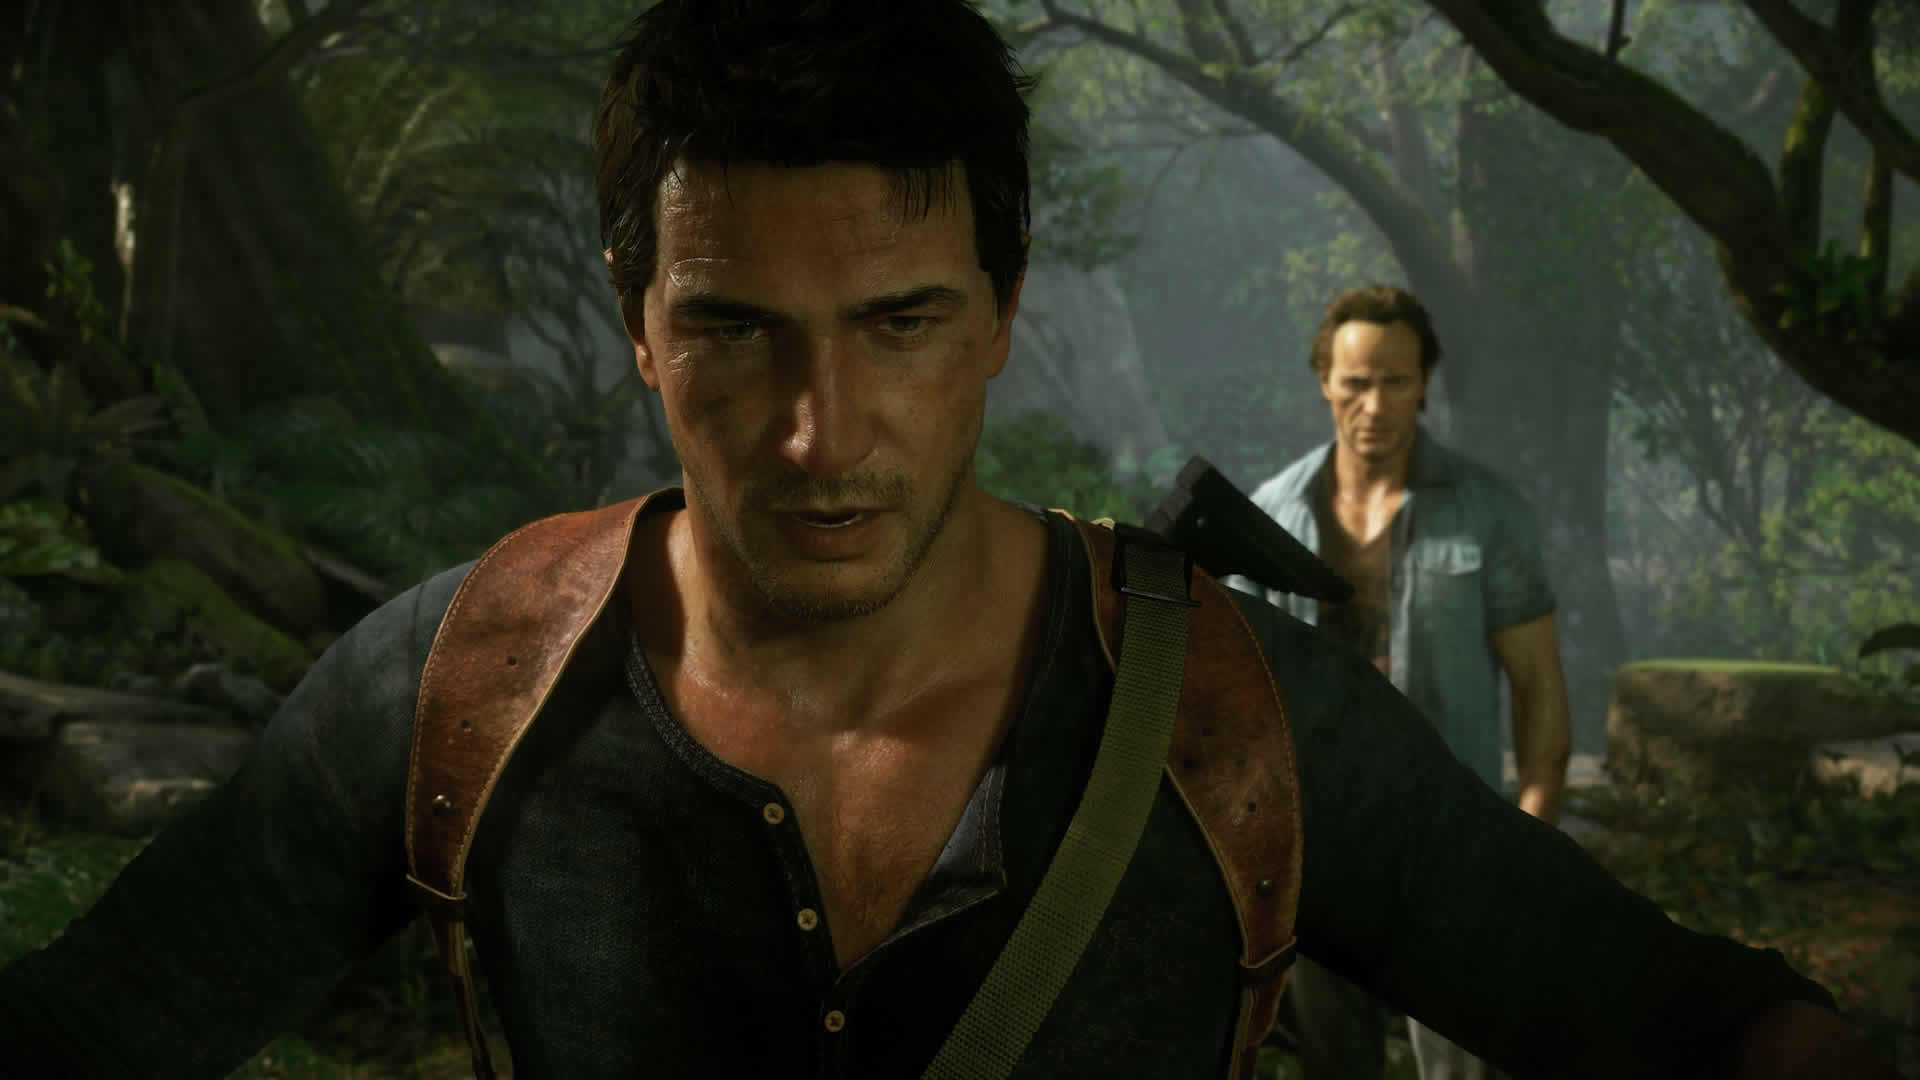 Uncharted 4 Cover Art and Images